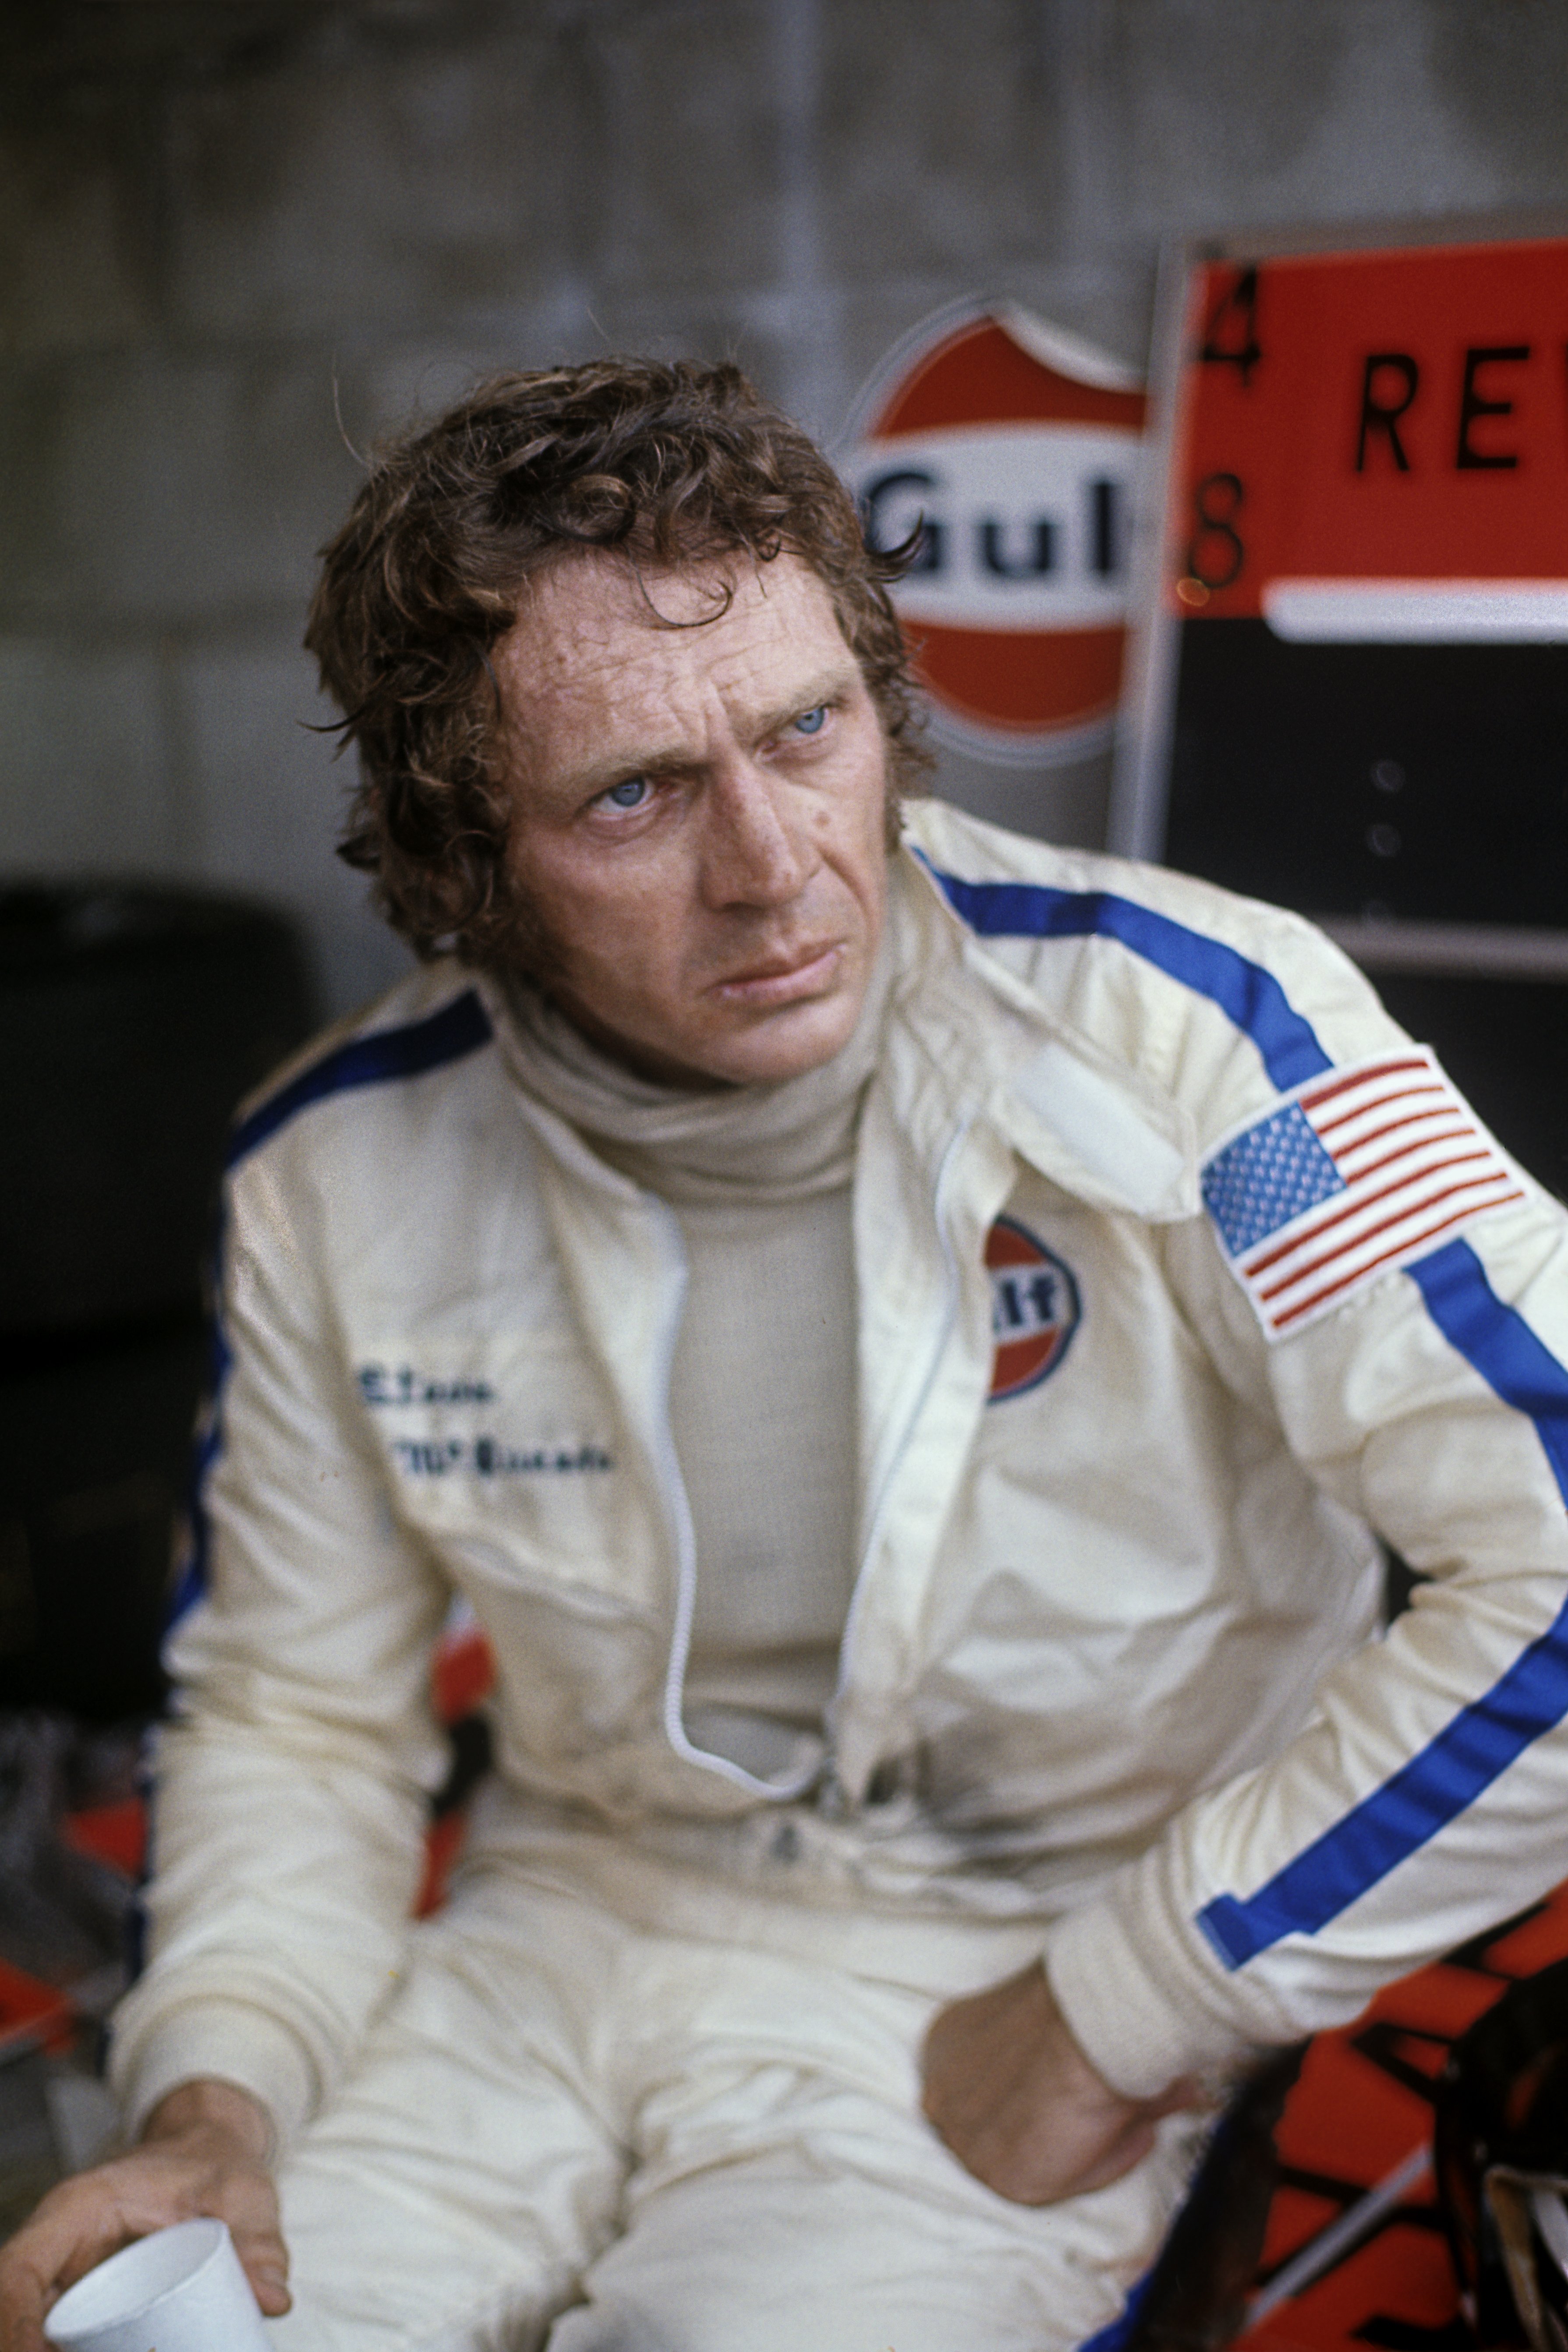 Steve McQueen poses during 12 Hours of Sebring race in 1970 | Photo: Getty Images